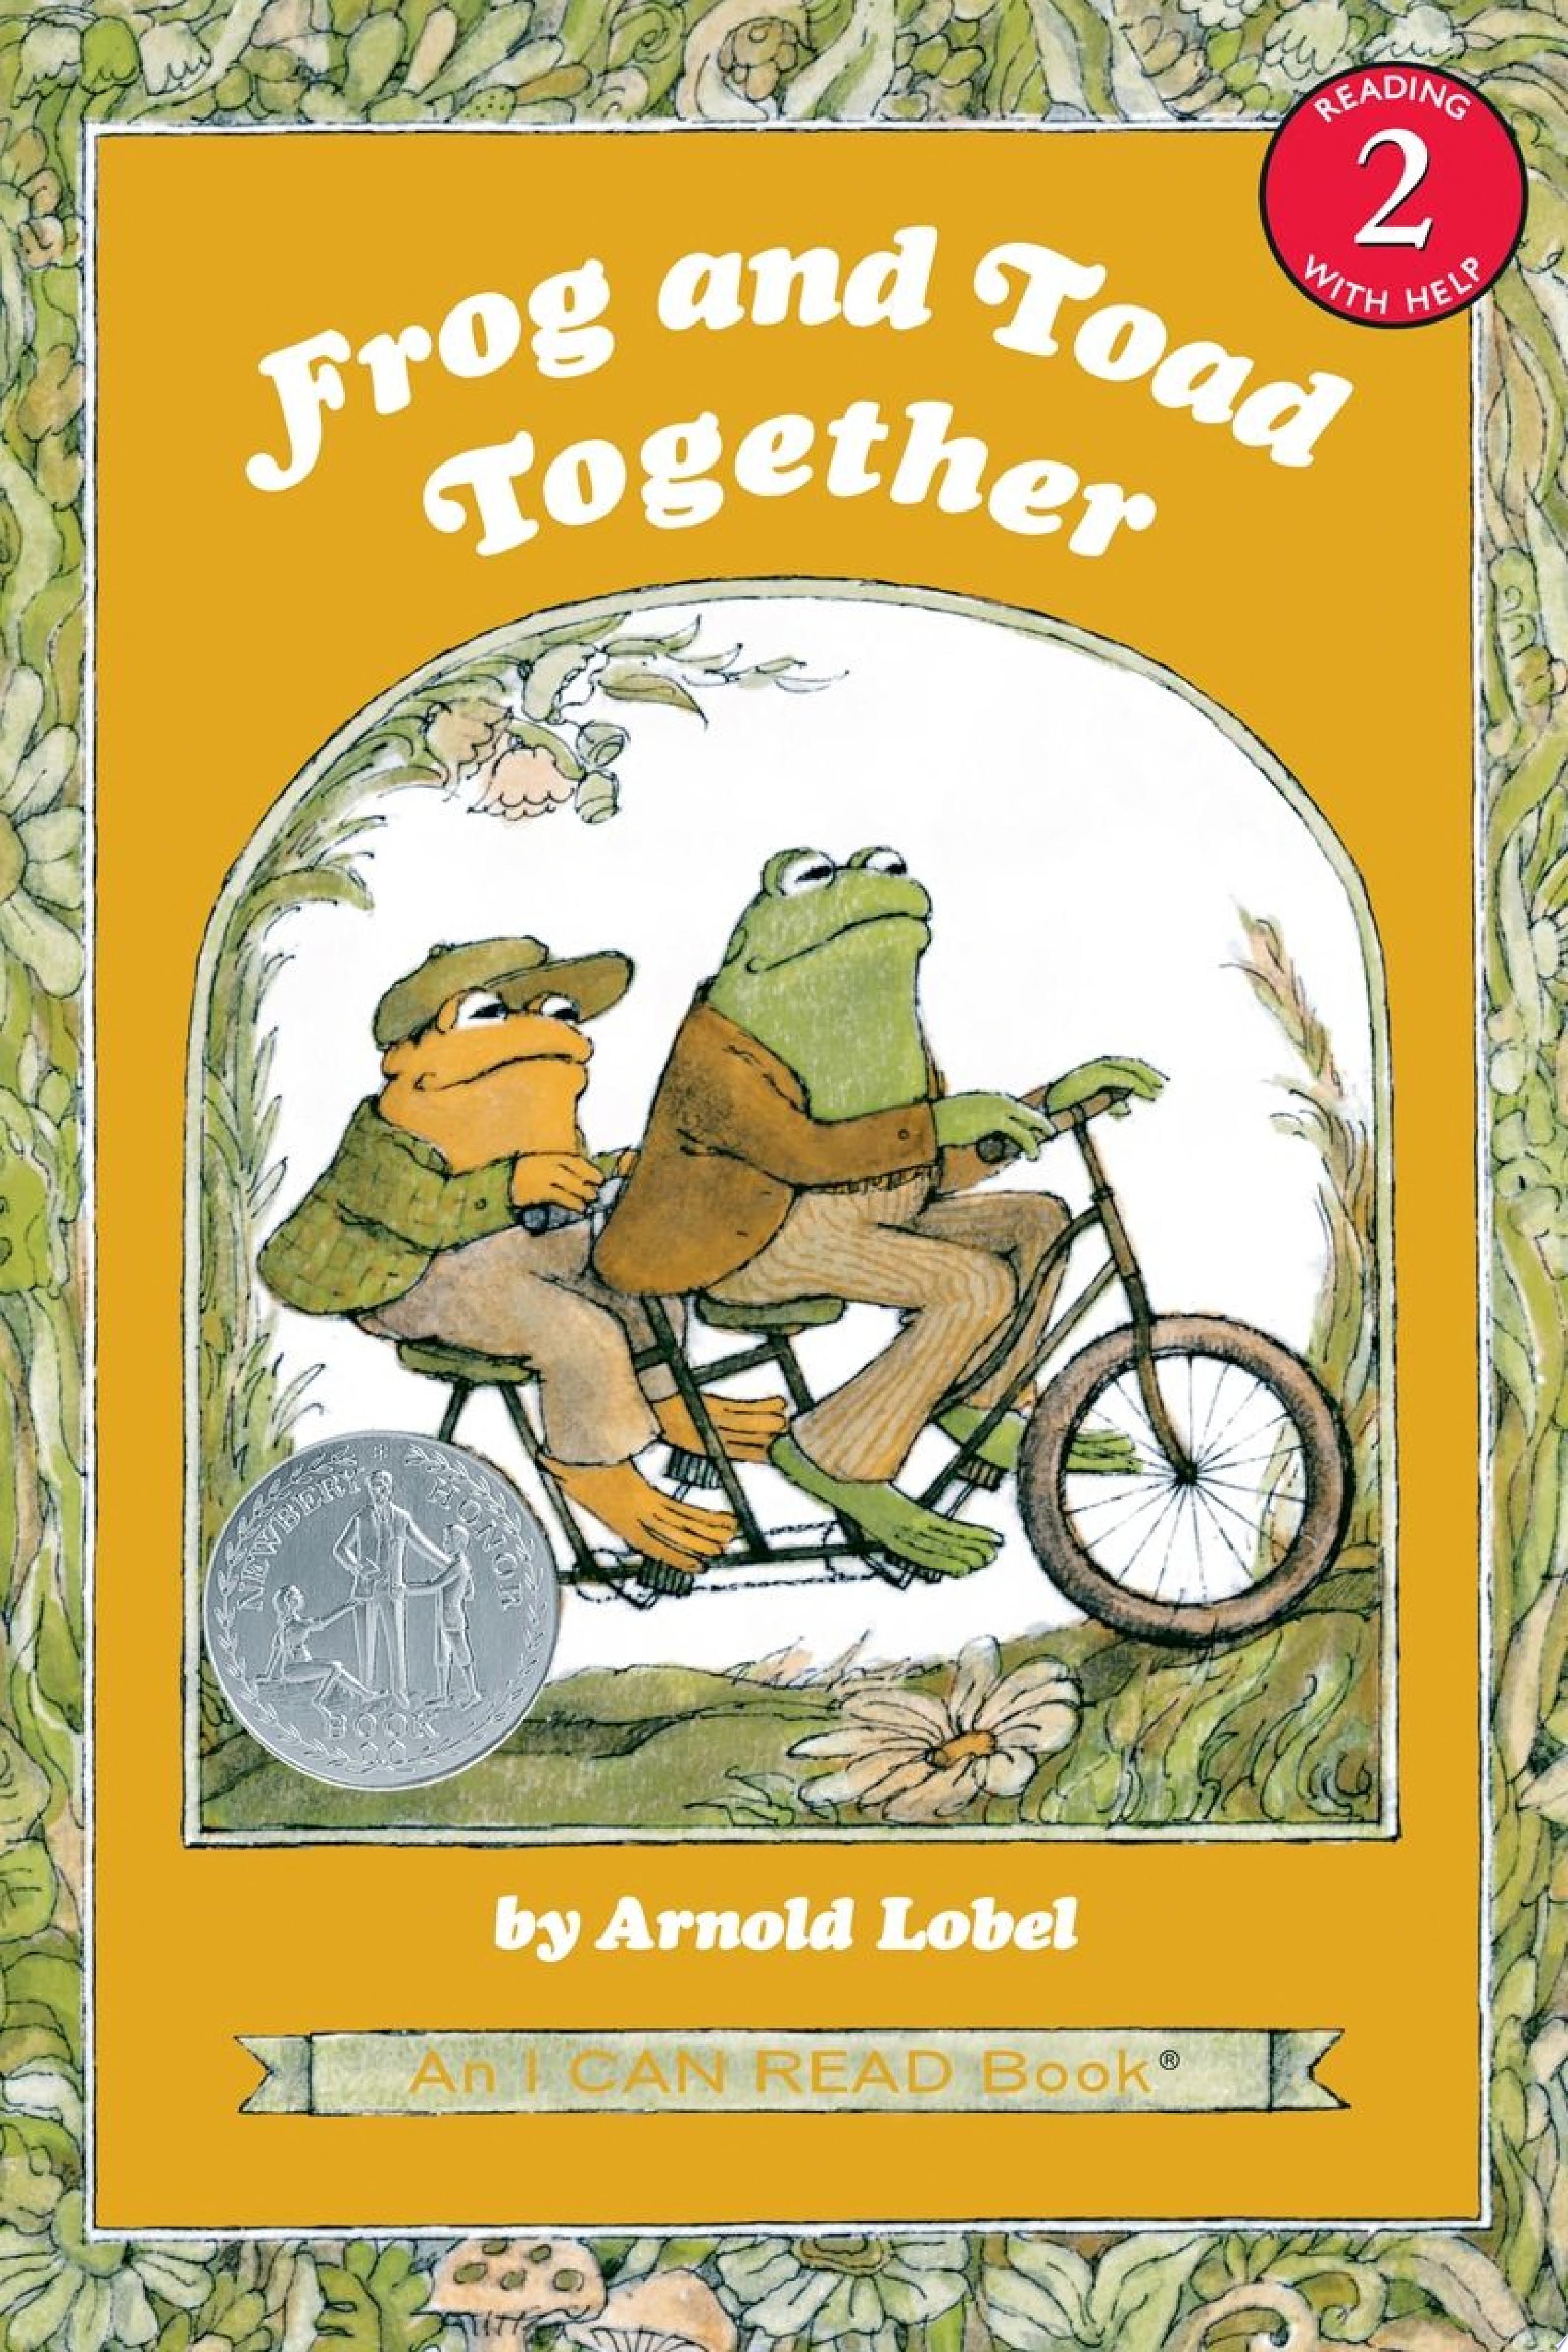 Image for "Frog and Toad Together"